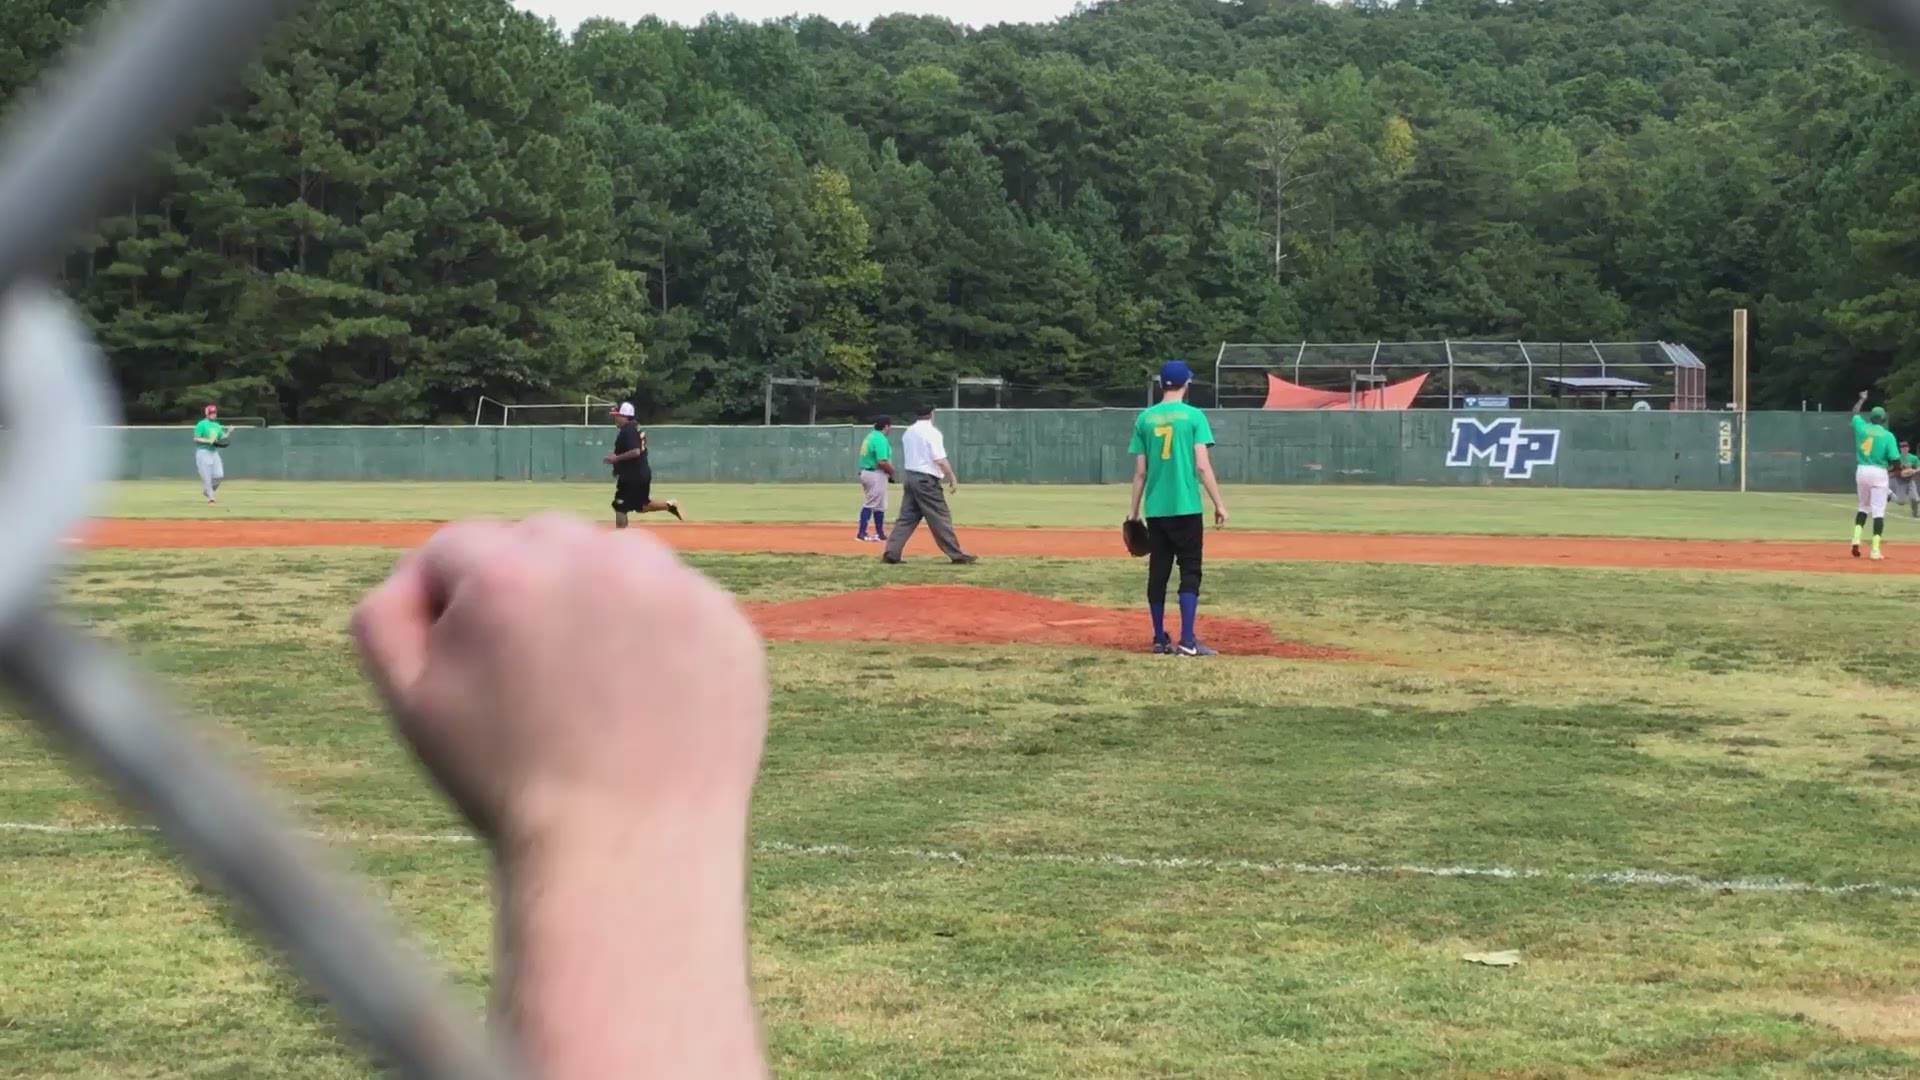 The inaugural ‘Ole Time Classic’ pits special needs players against former major leaguers.